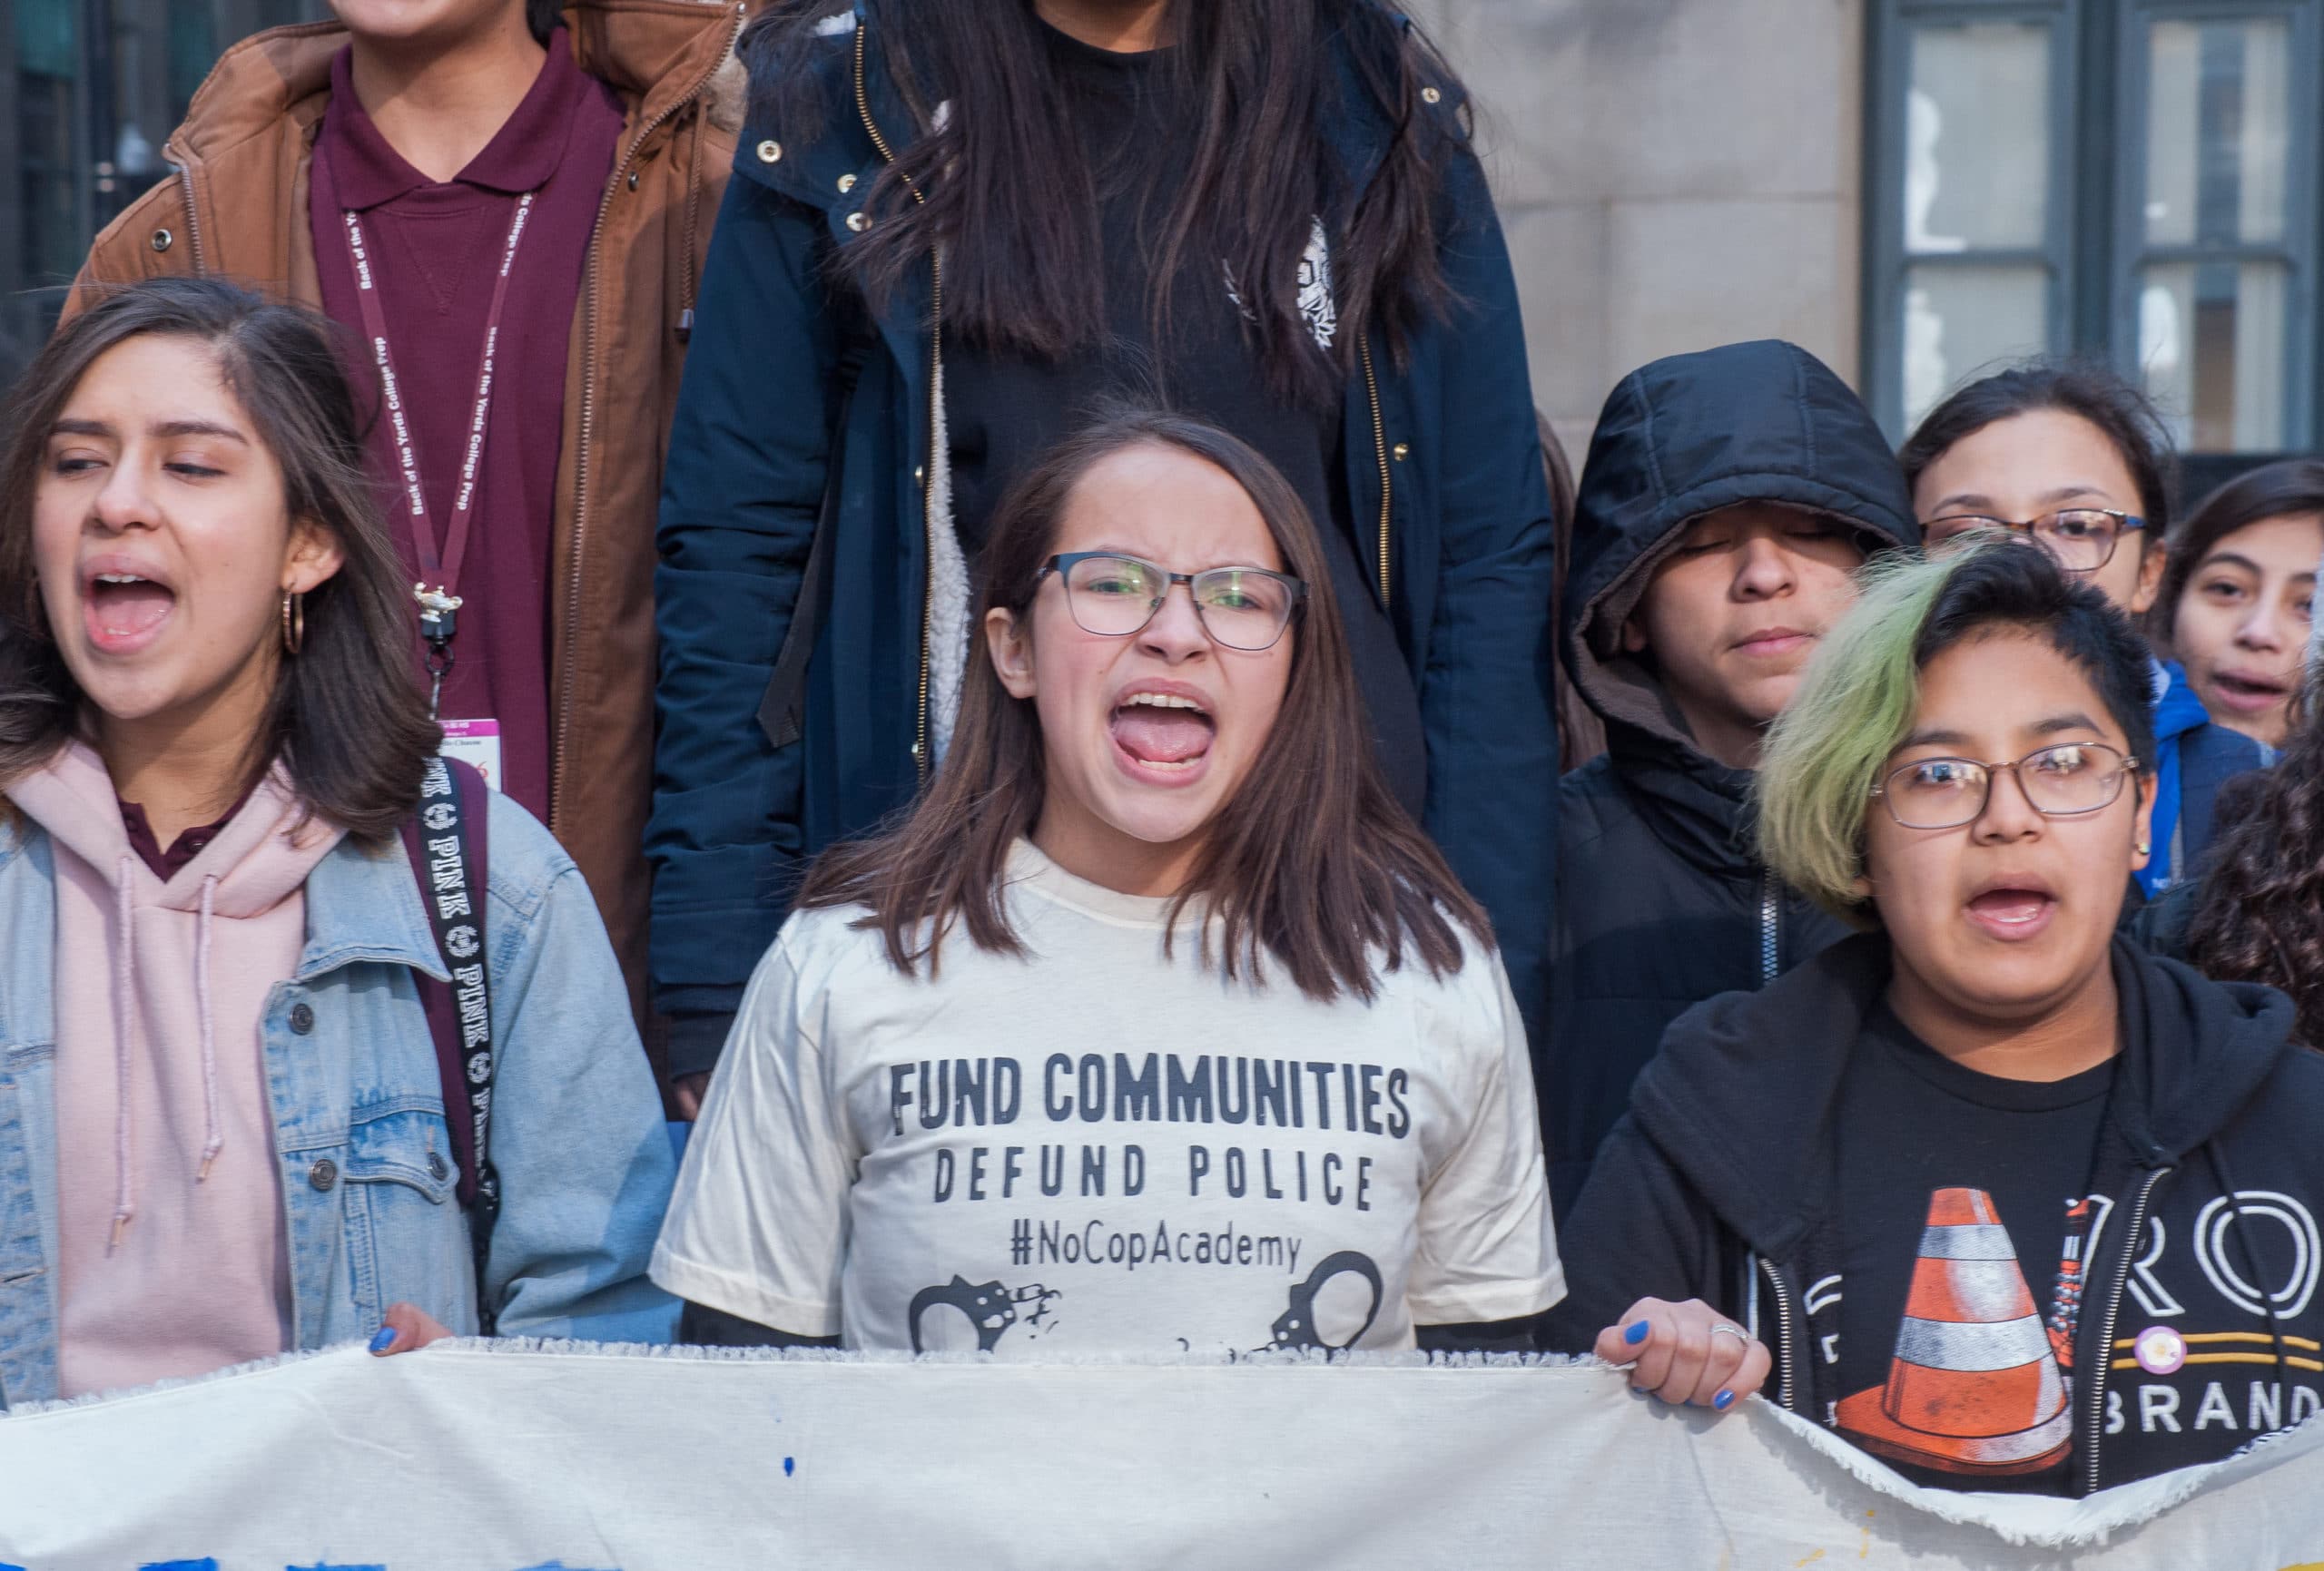 Chicago youth who took part in the national school walkout over gun violence on March 14th rally across the street from City Hall. Photo by Aaron Cynic.